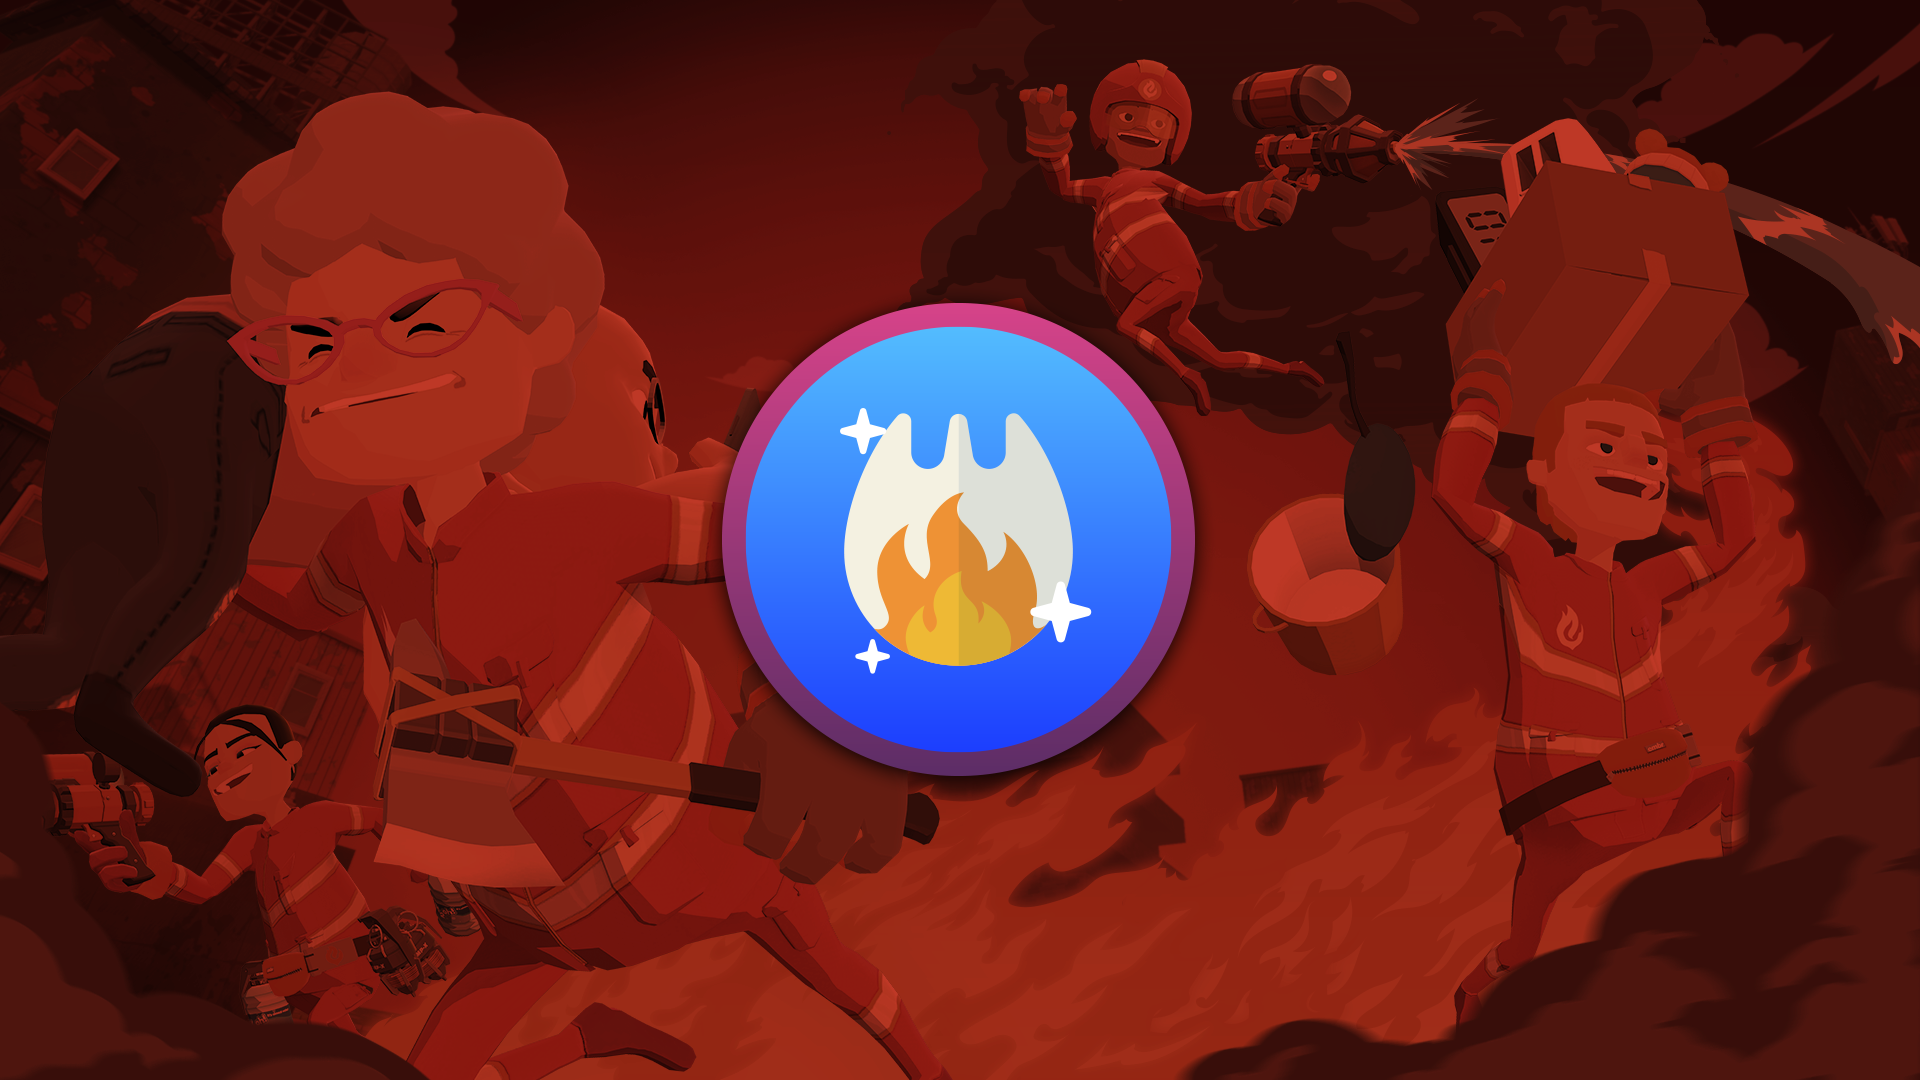 Icon for Flame Broiled